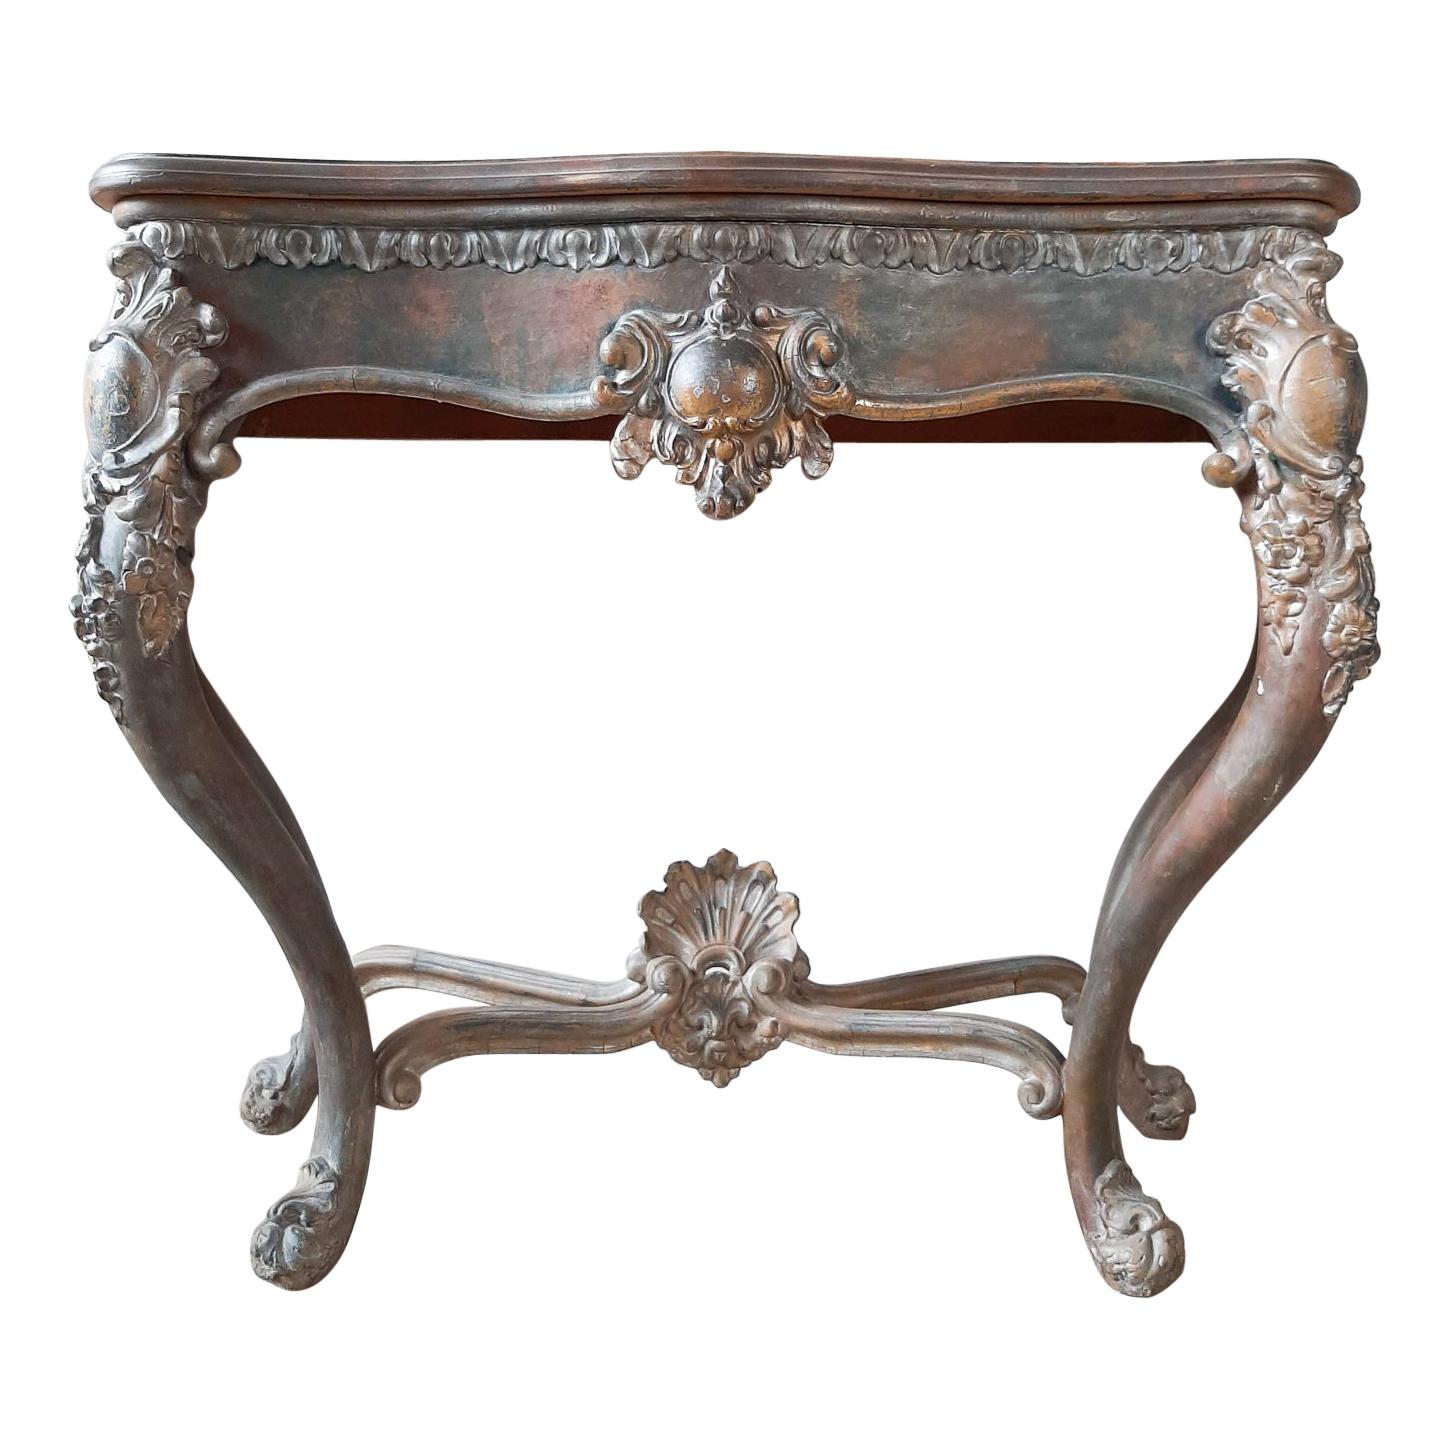 19th Century Console Table with Special Patina in Gold, Cognac and Petrol Tones For Sale